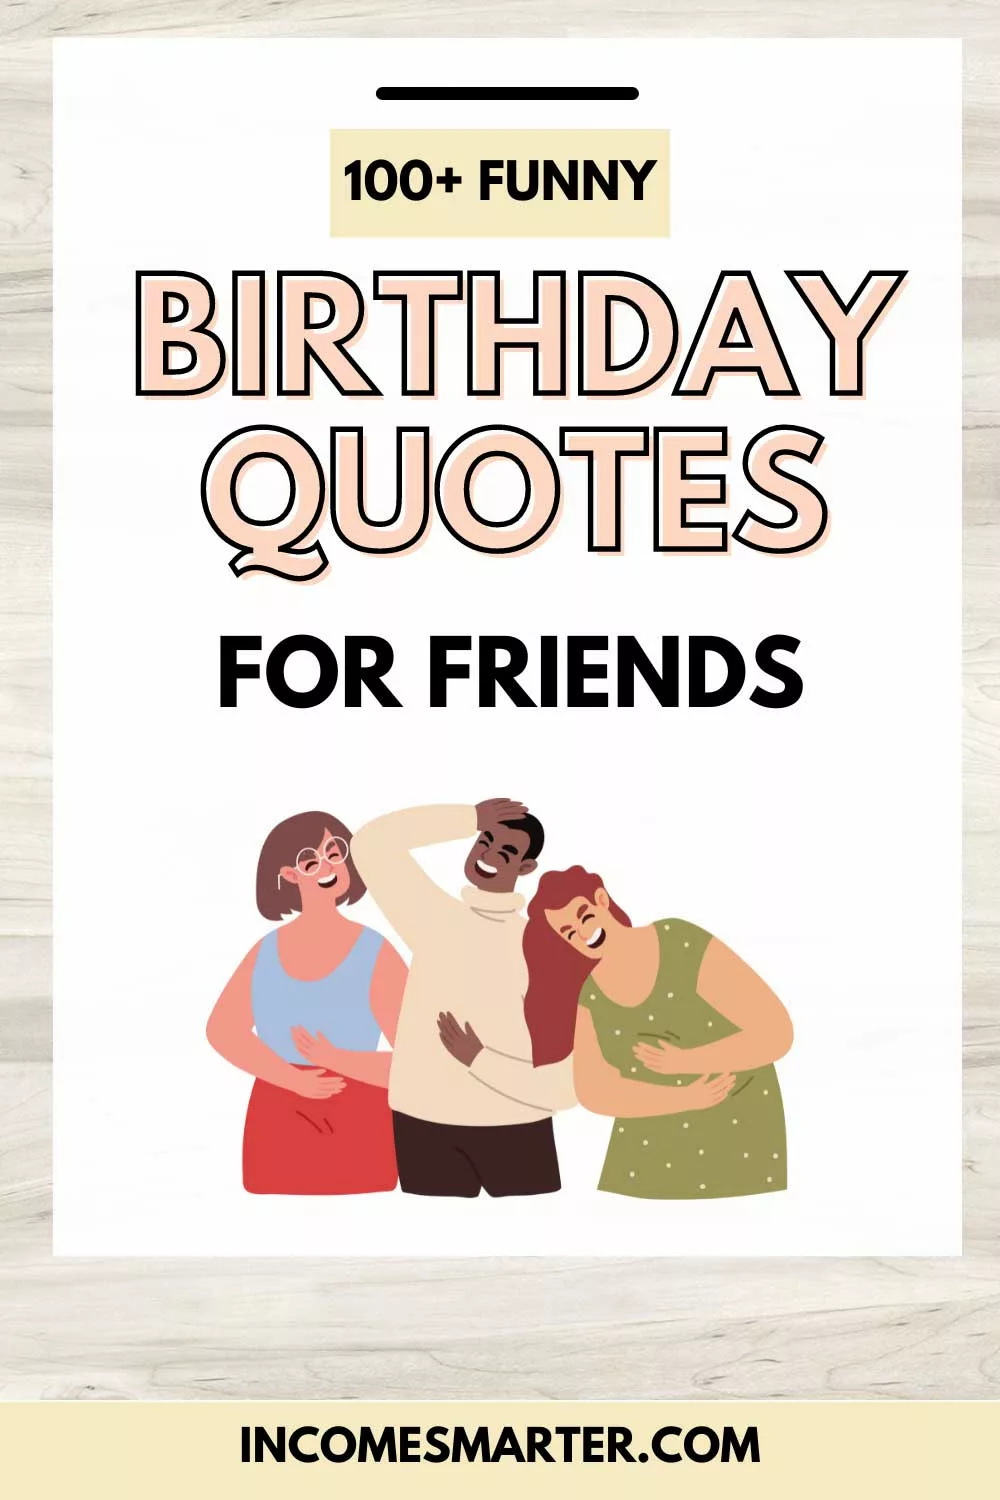 100 funny birthday quotes for friends!